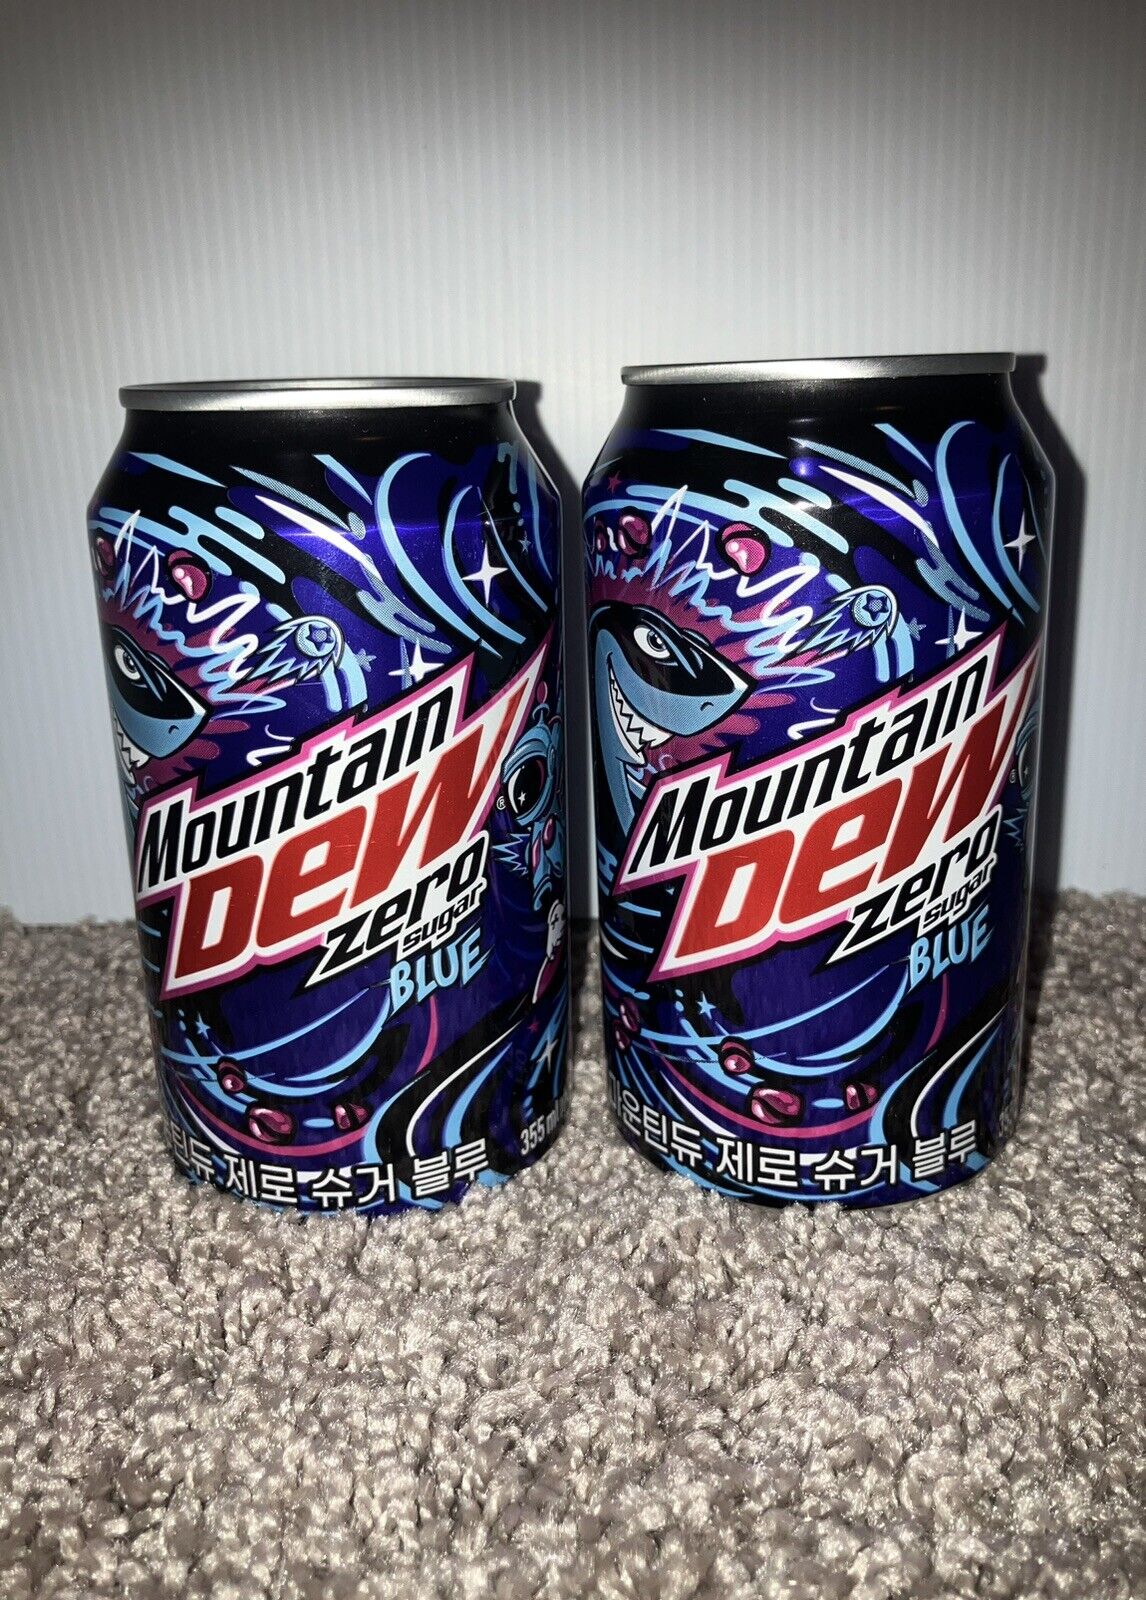 (2 PACK) Mountain Dew Blue Zero Sugar Korea Exclusive Full Sealed Cans